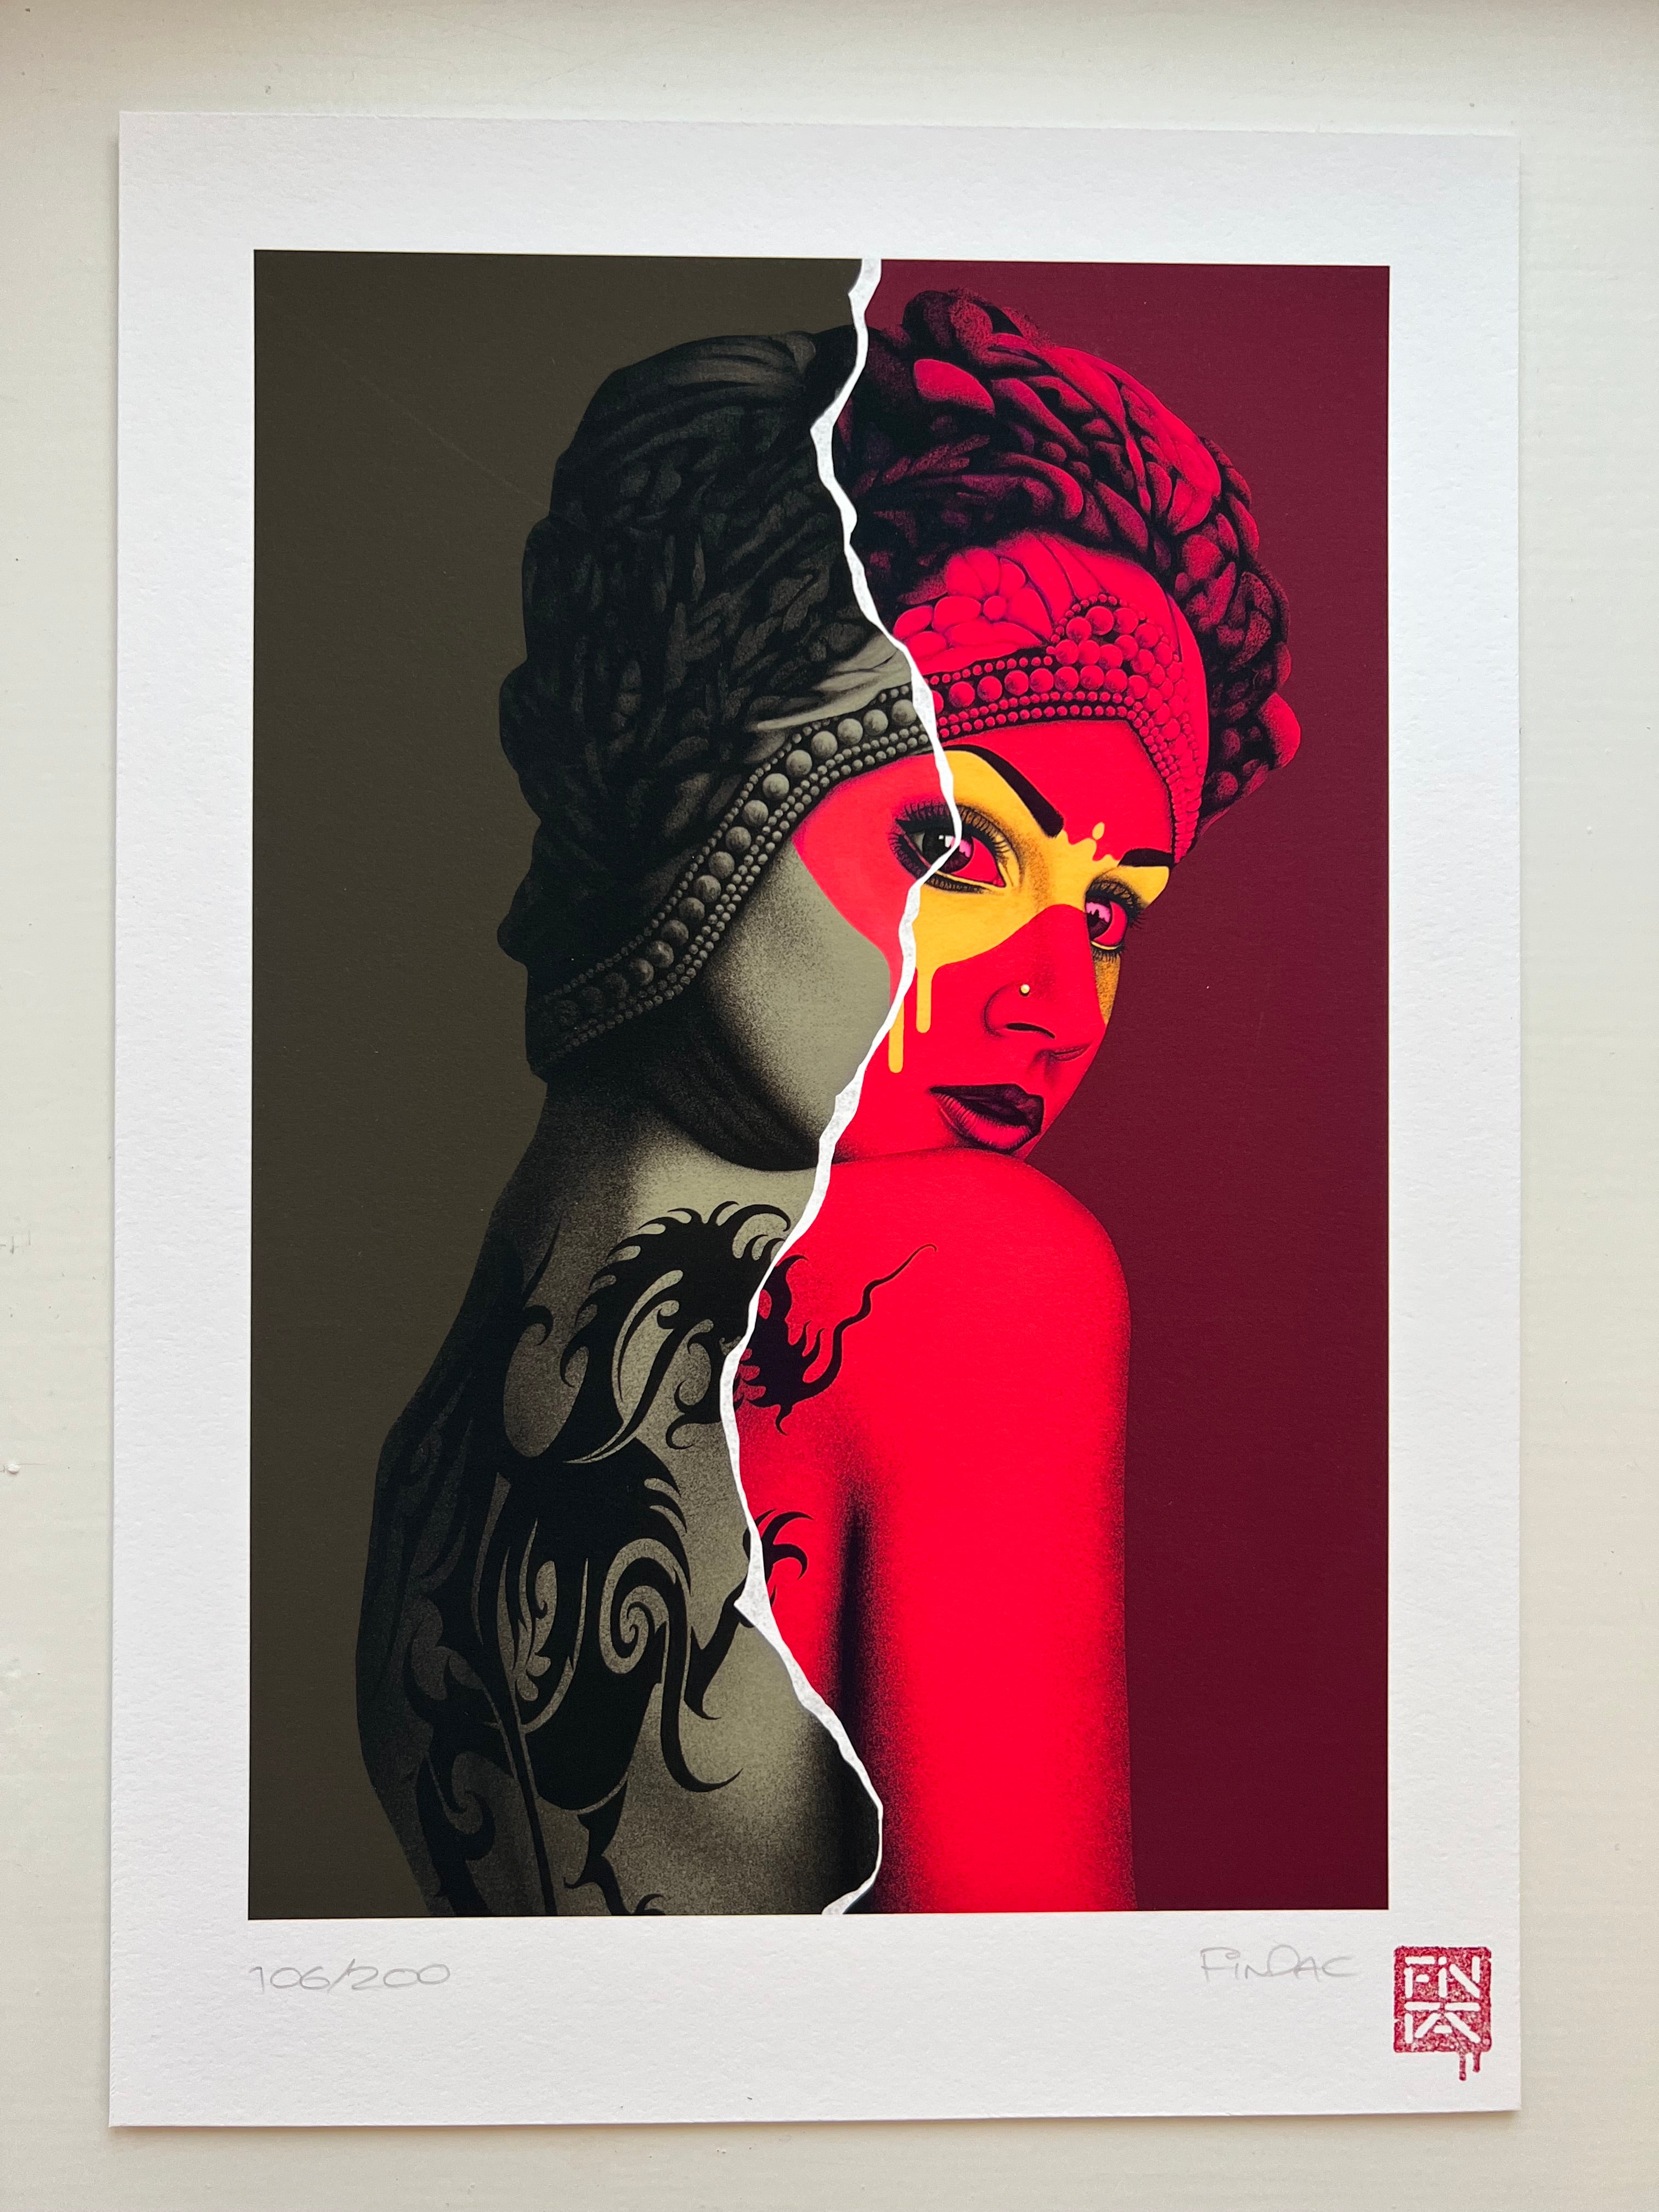 Fin Dac Afterglow book and limited edition print 106 / 200